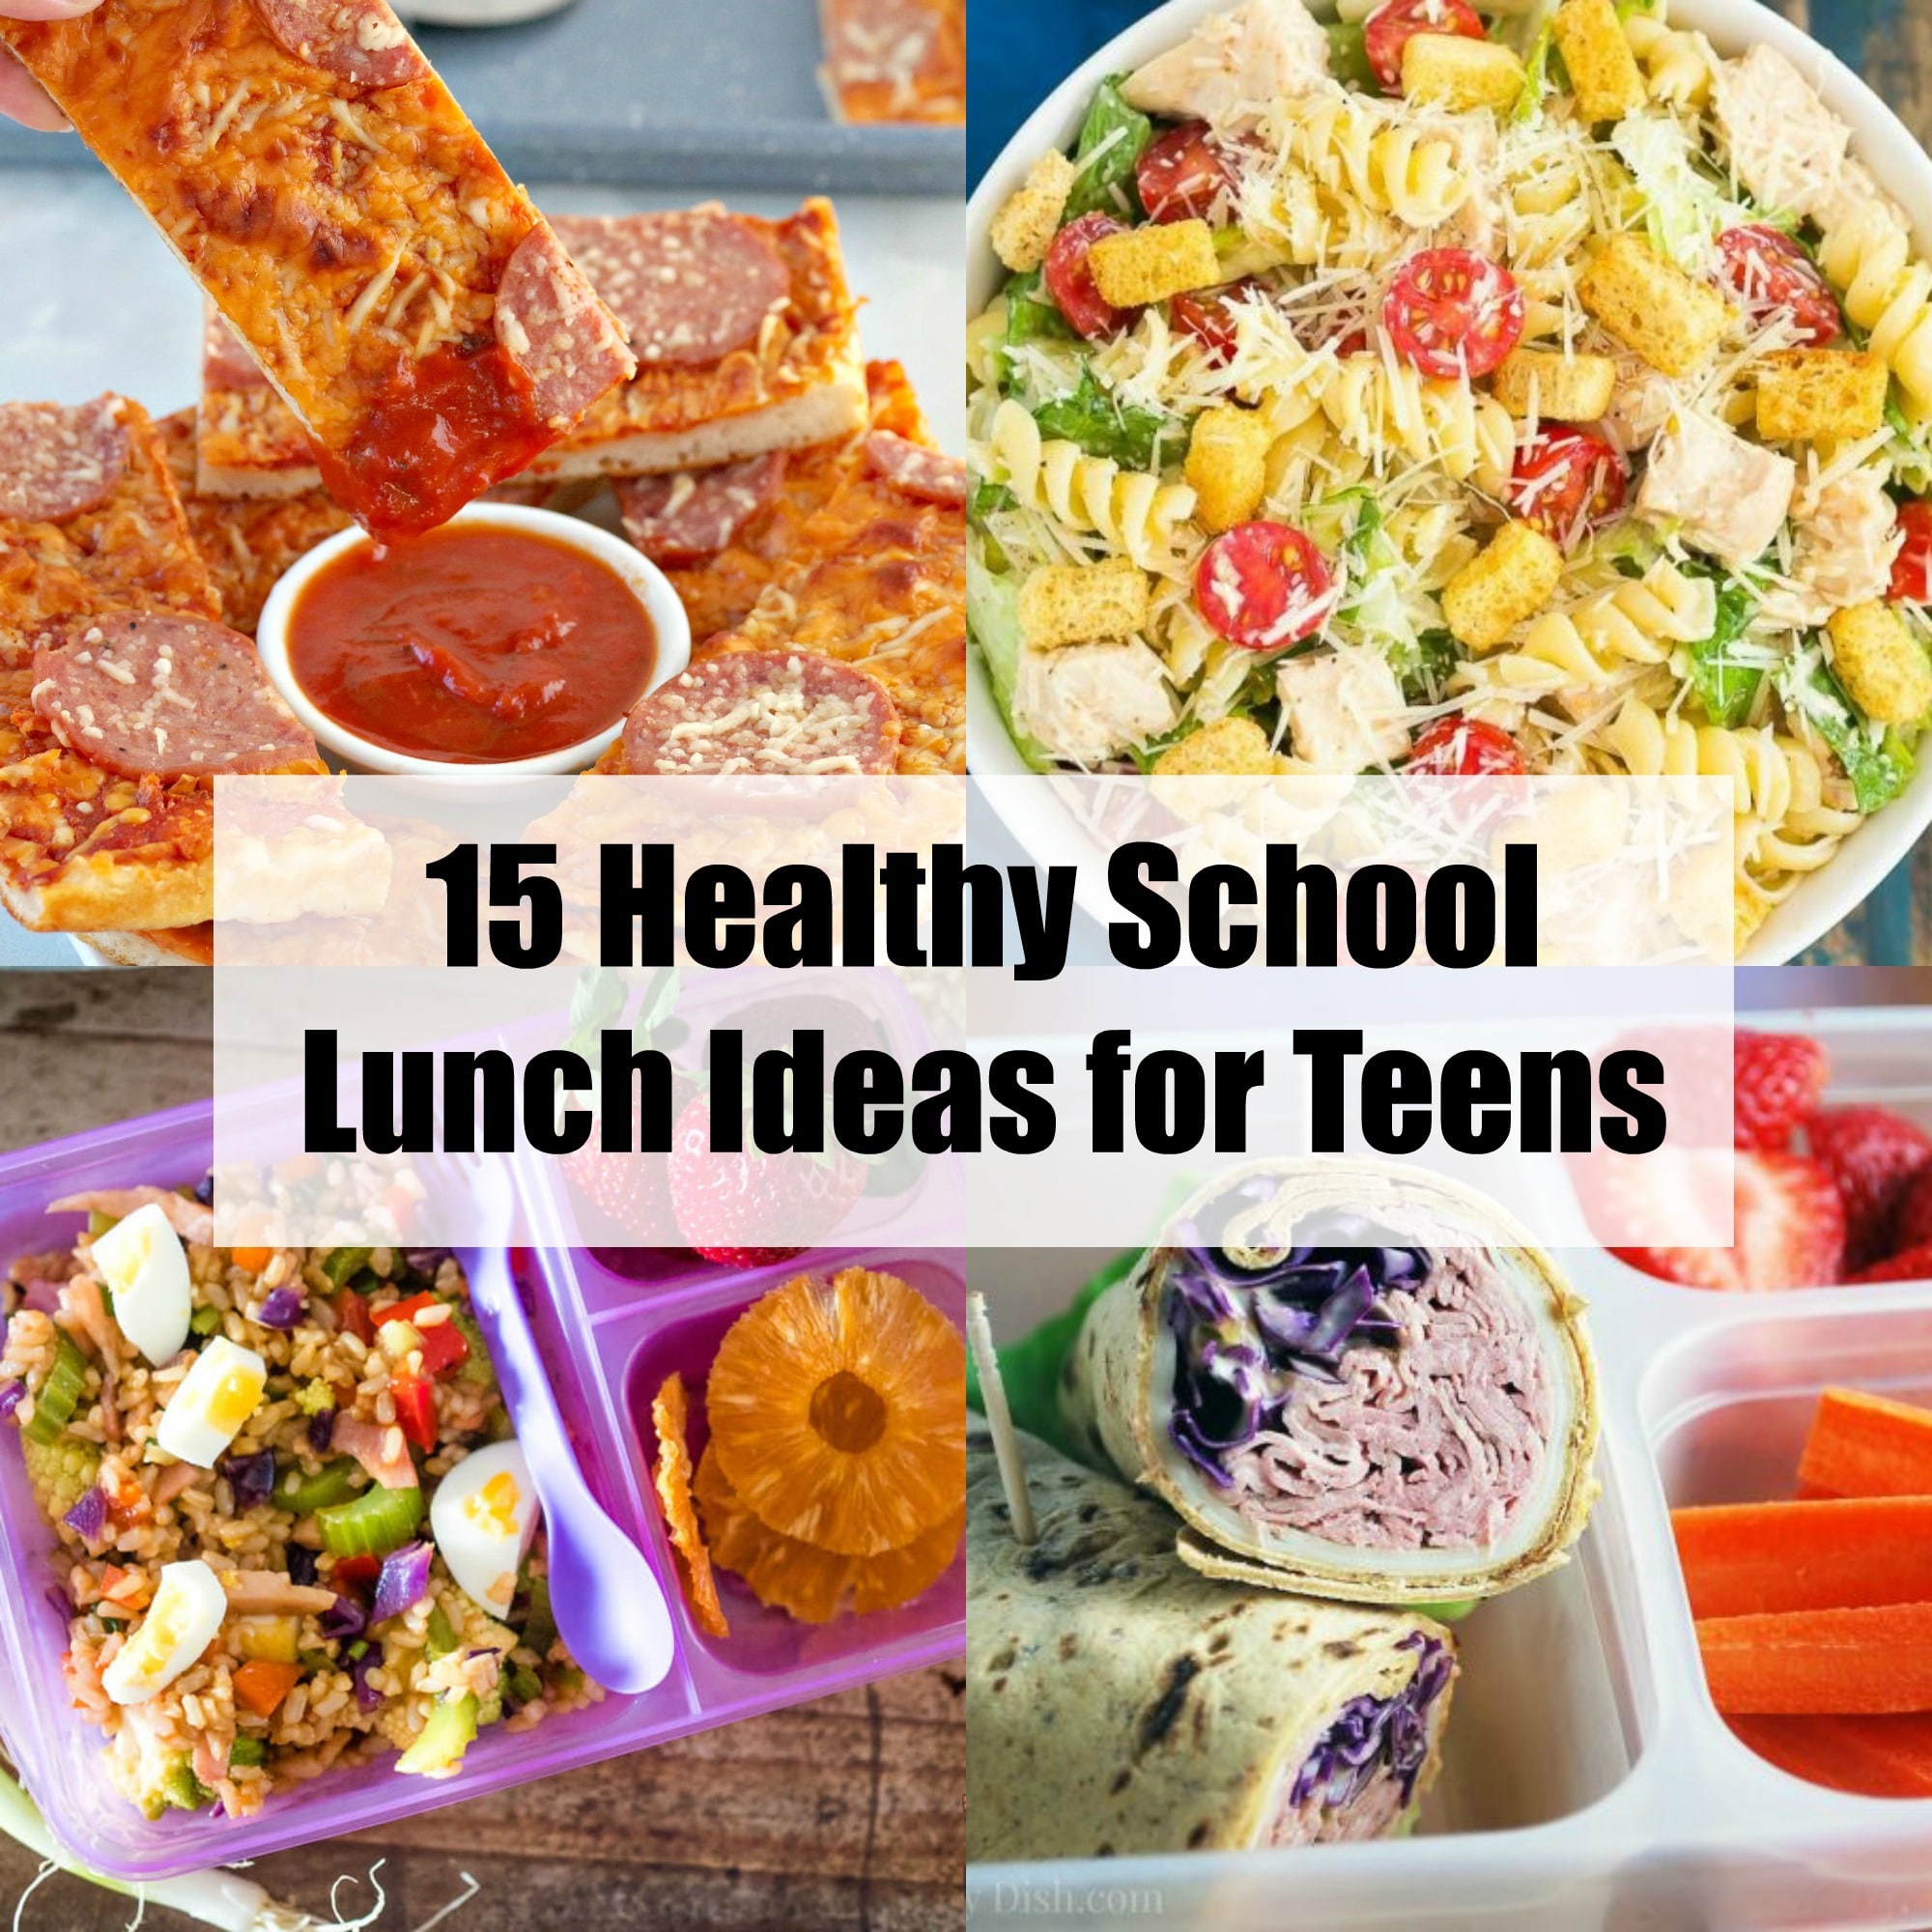 How to make a healthy lunch